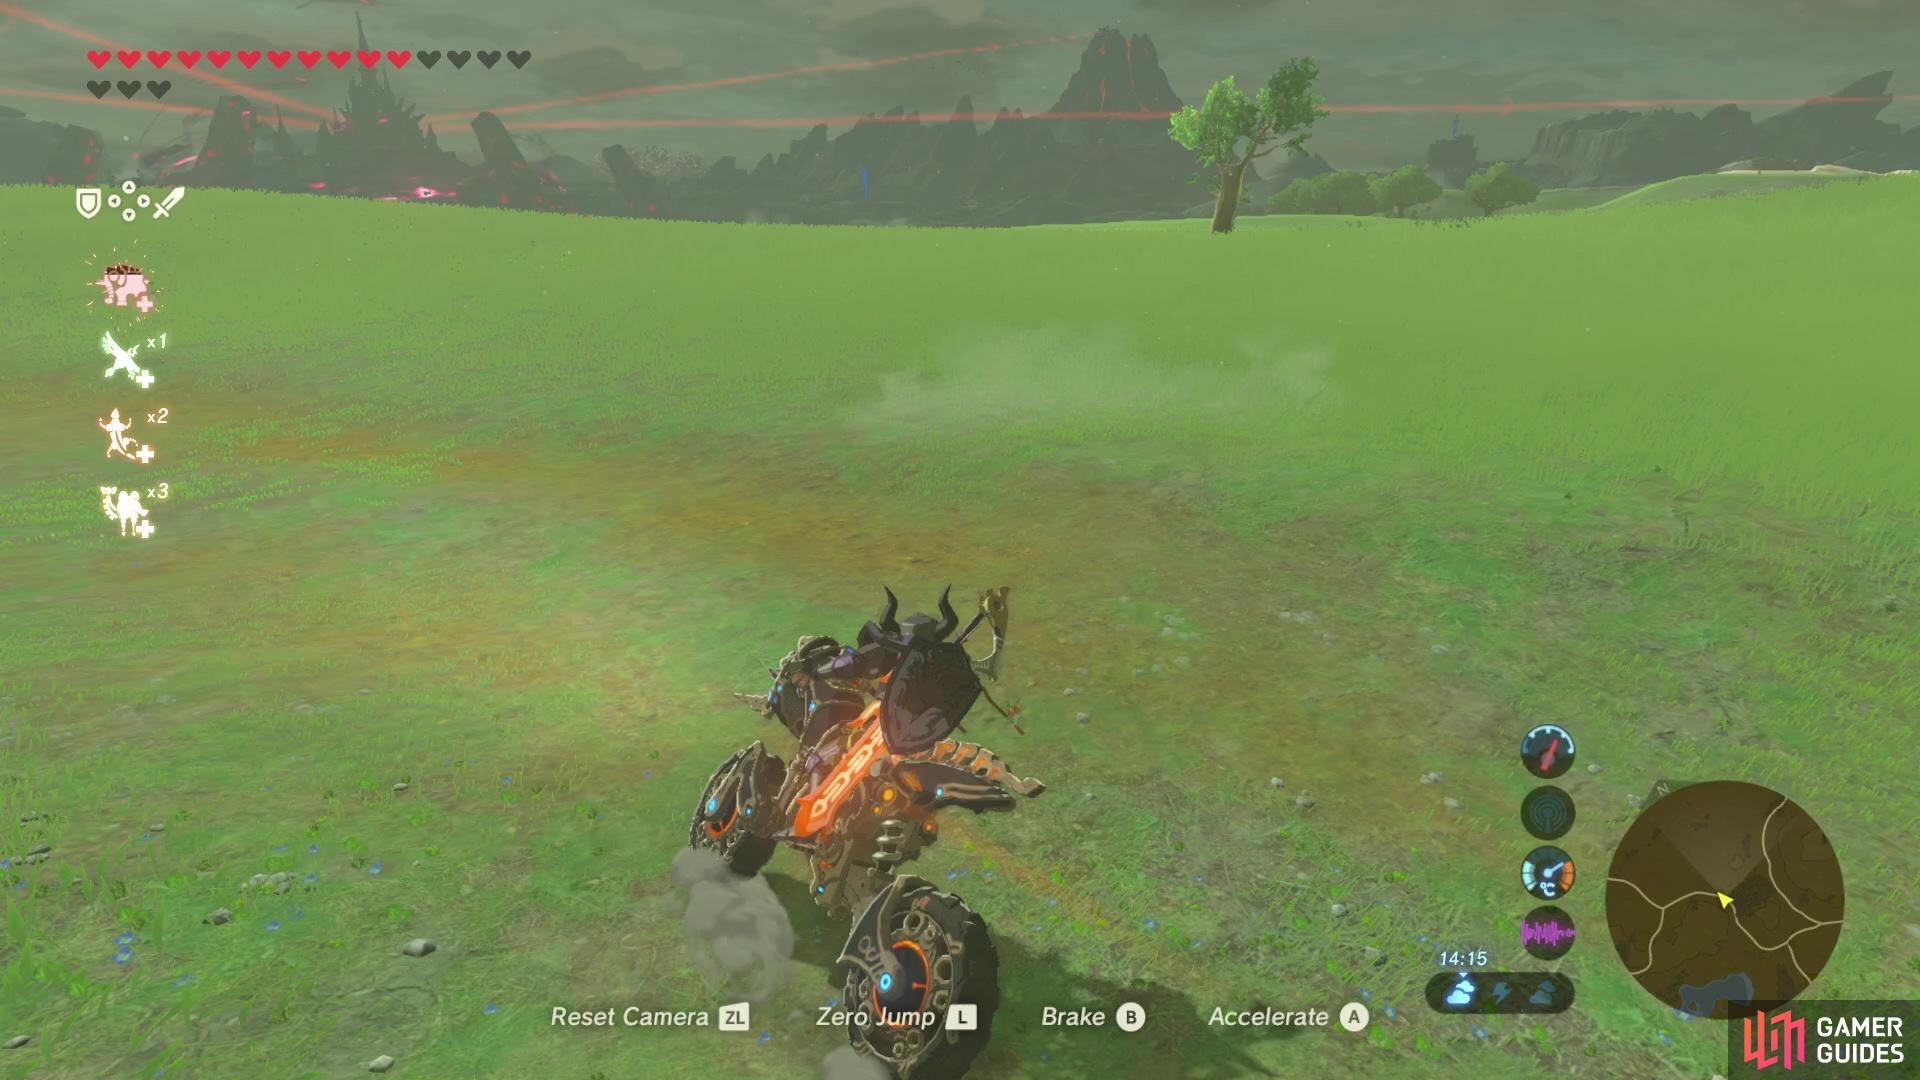 You can explore Hyrule faster than ever